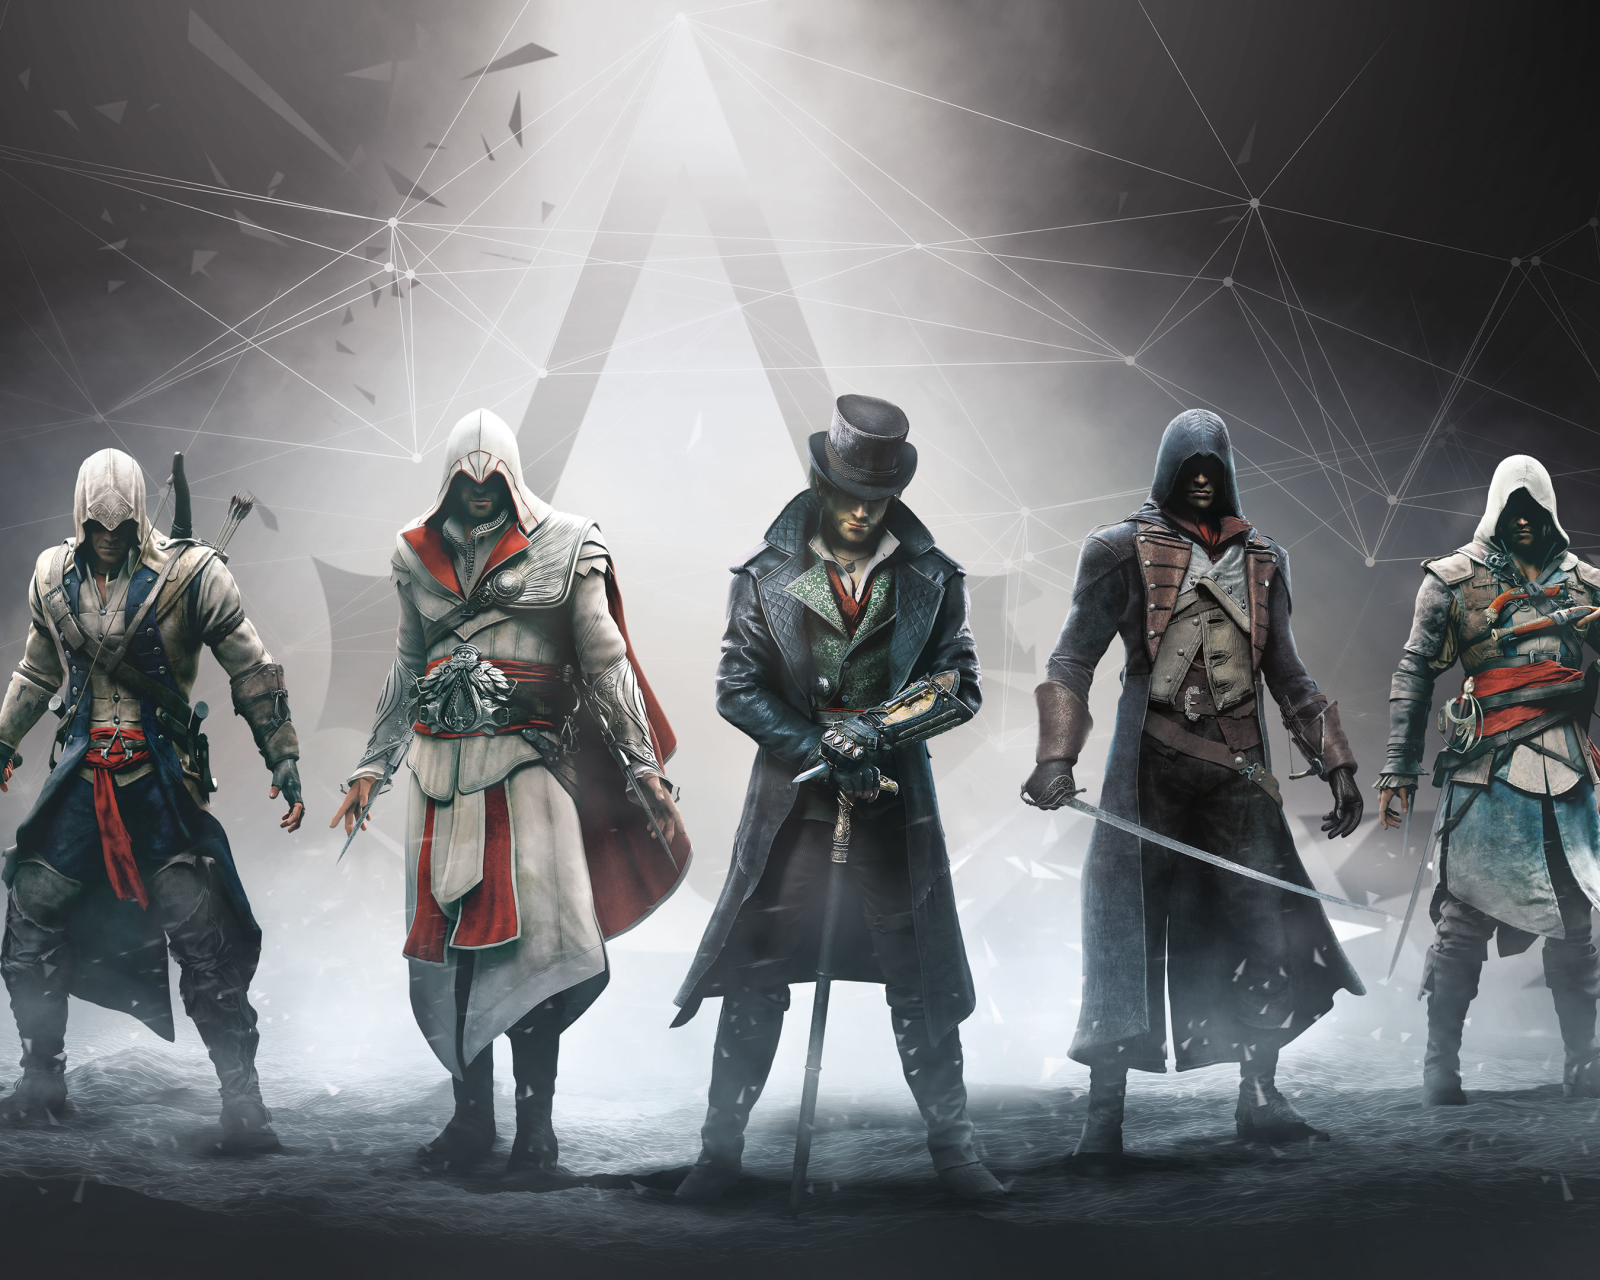 video game, assassin's creed, edward kenway, ezio (assassin's creed), altair (assassin's creed), jacob frye, connor (assassin's creed)